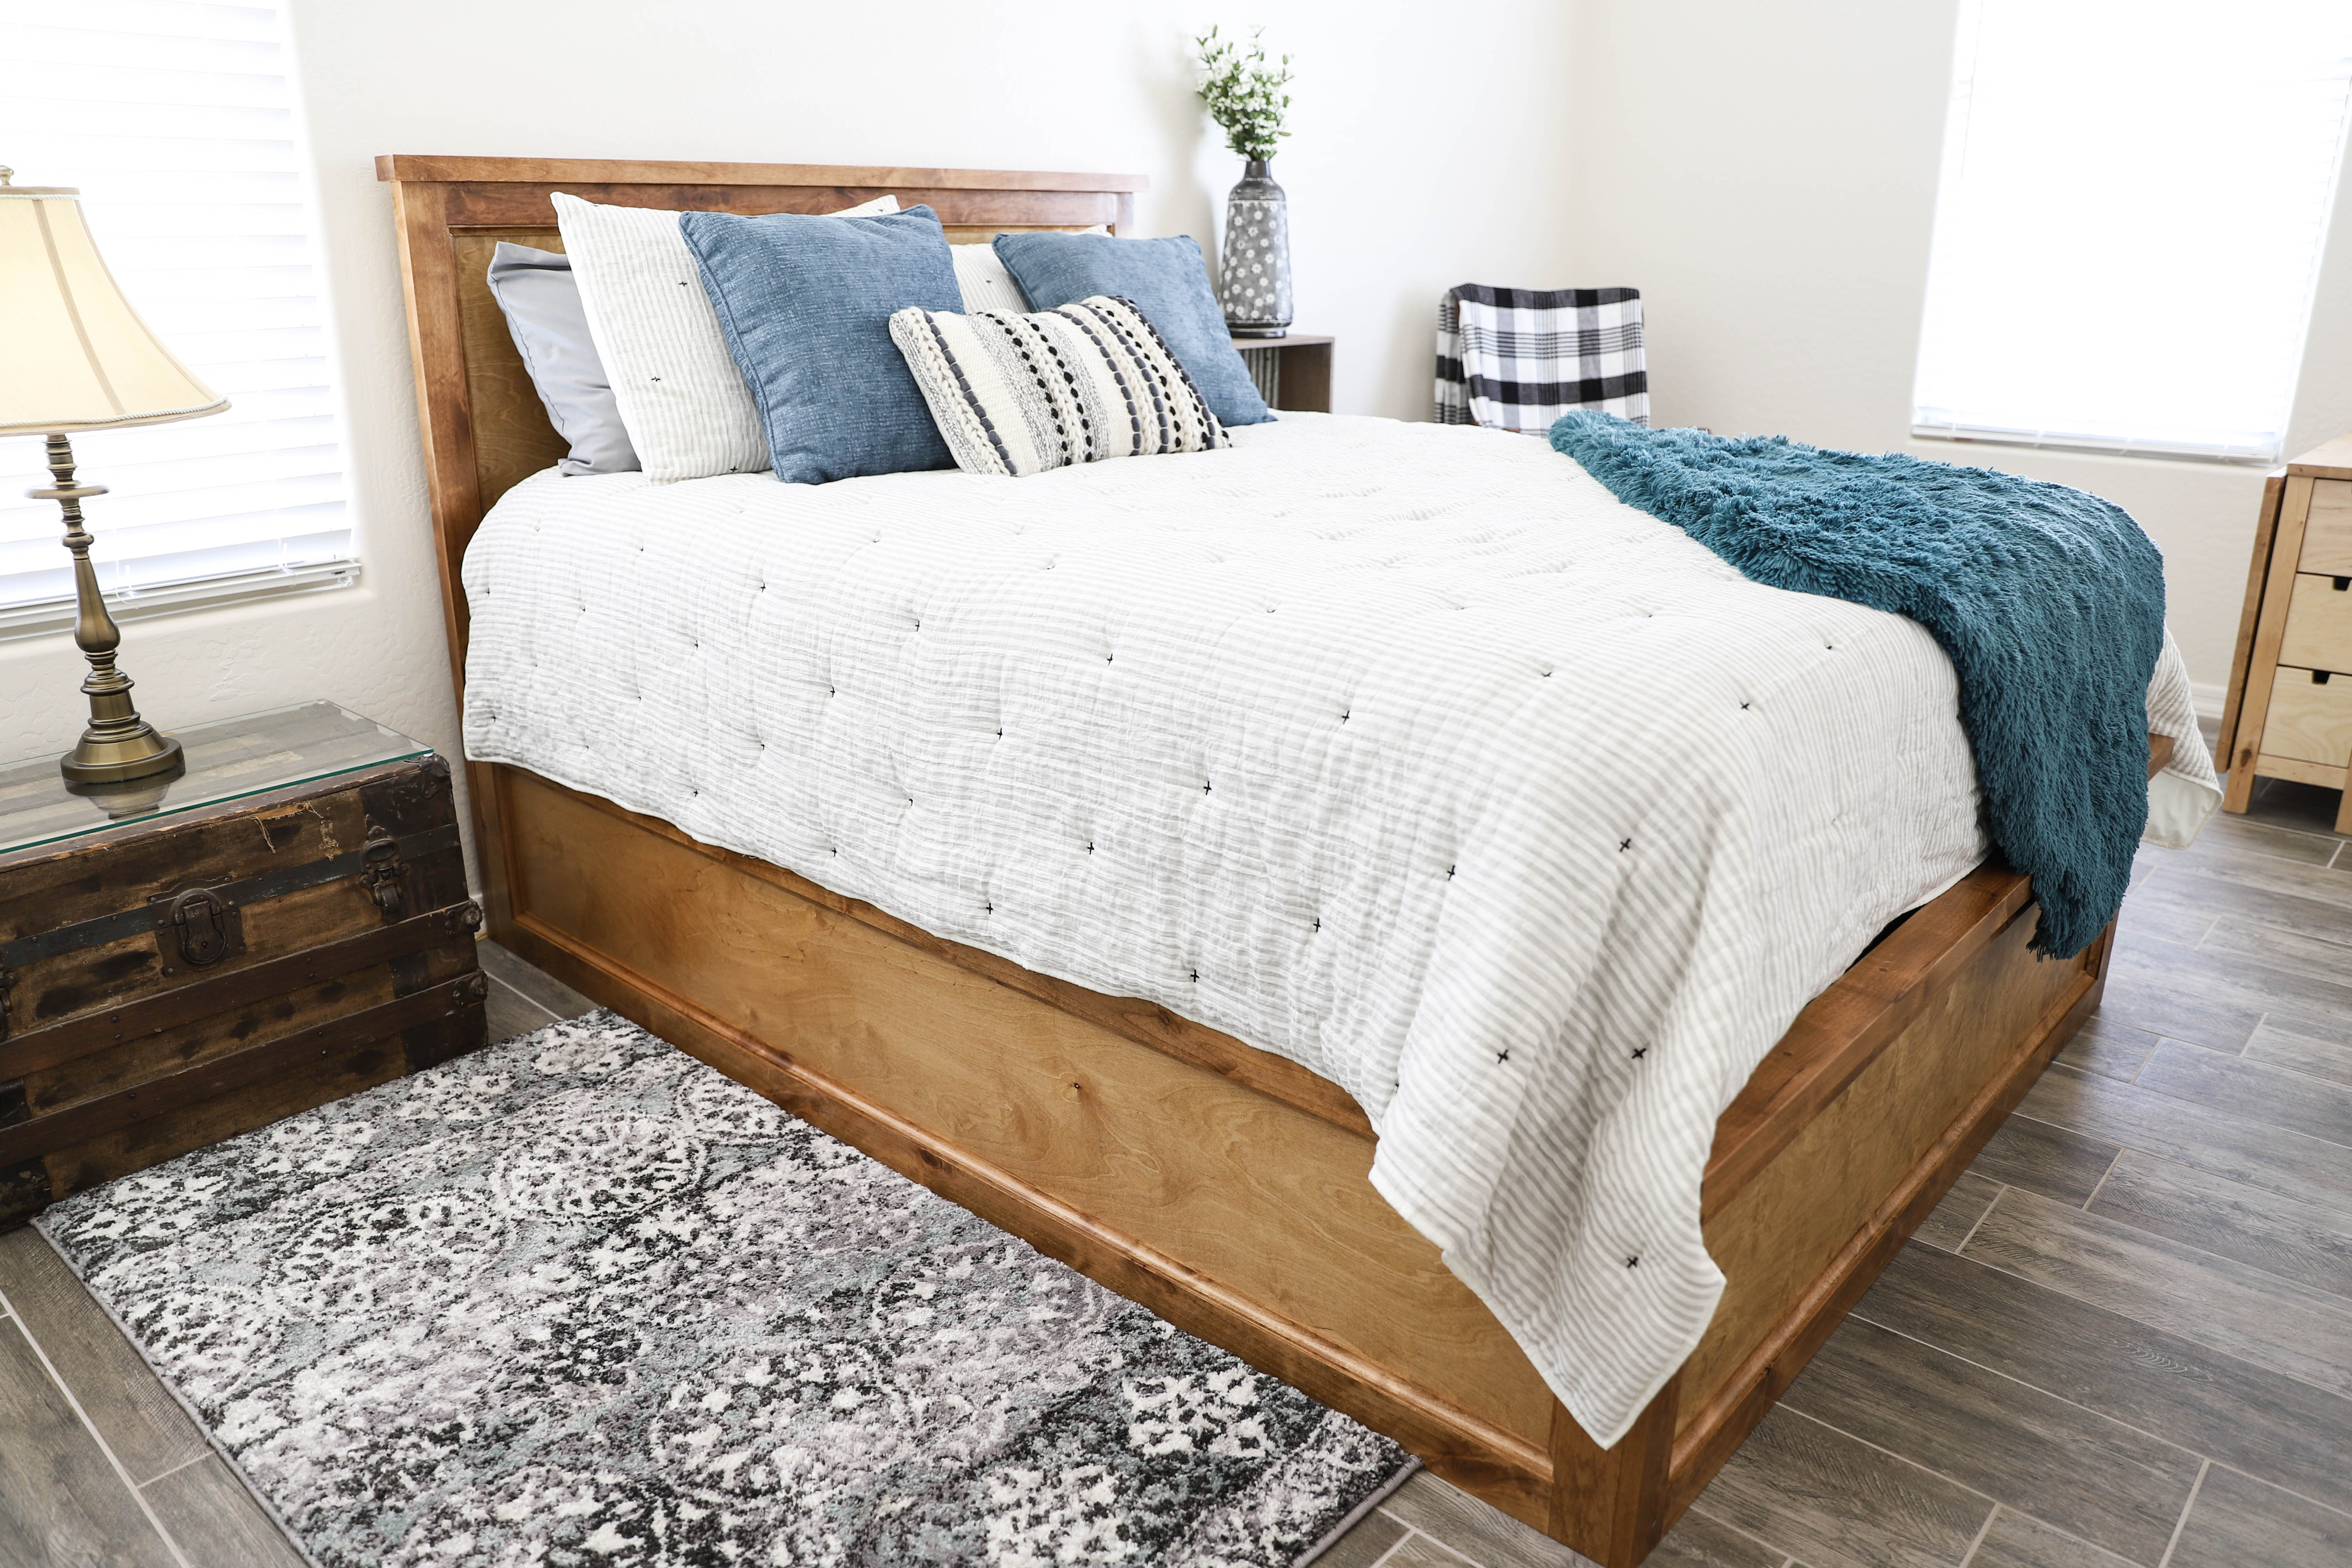 How To Build A Queen Size Storage Bed, Diy Rustic Queen Bed Frame With Storage